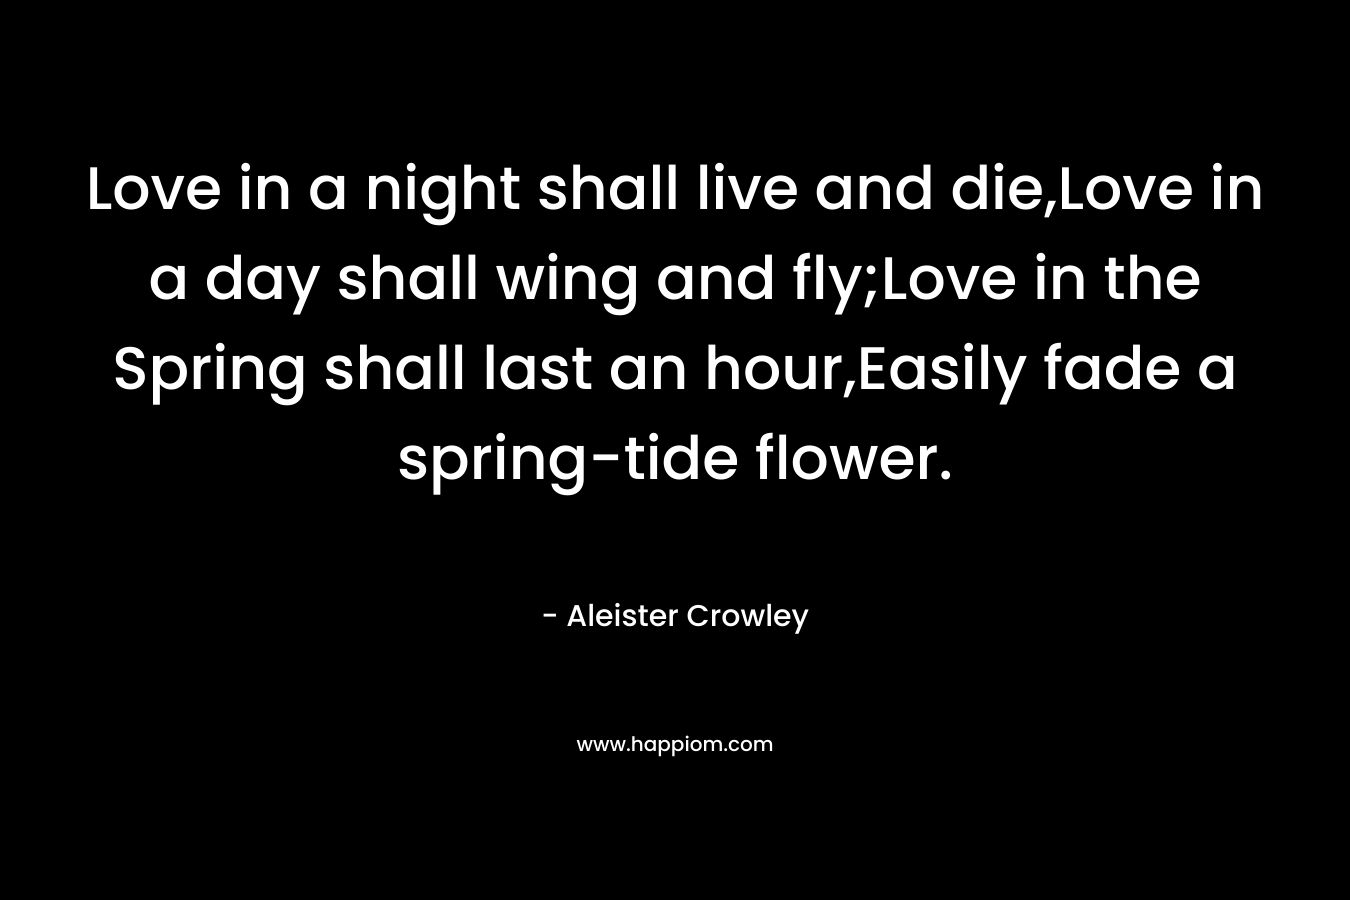 Love in a night shall live and die,Love in a day shall wing and fly;Love in the Spring shall last an hour,Easily fade a spring-tide flower.